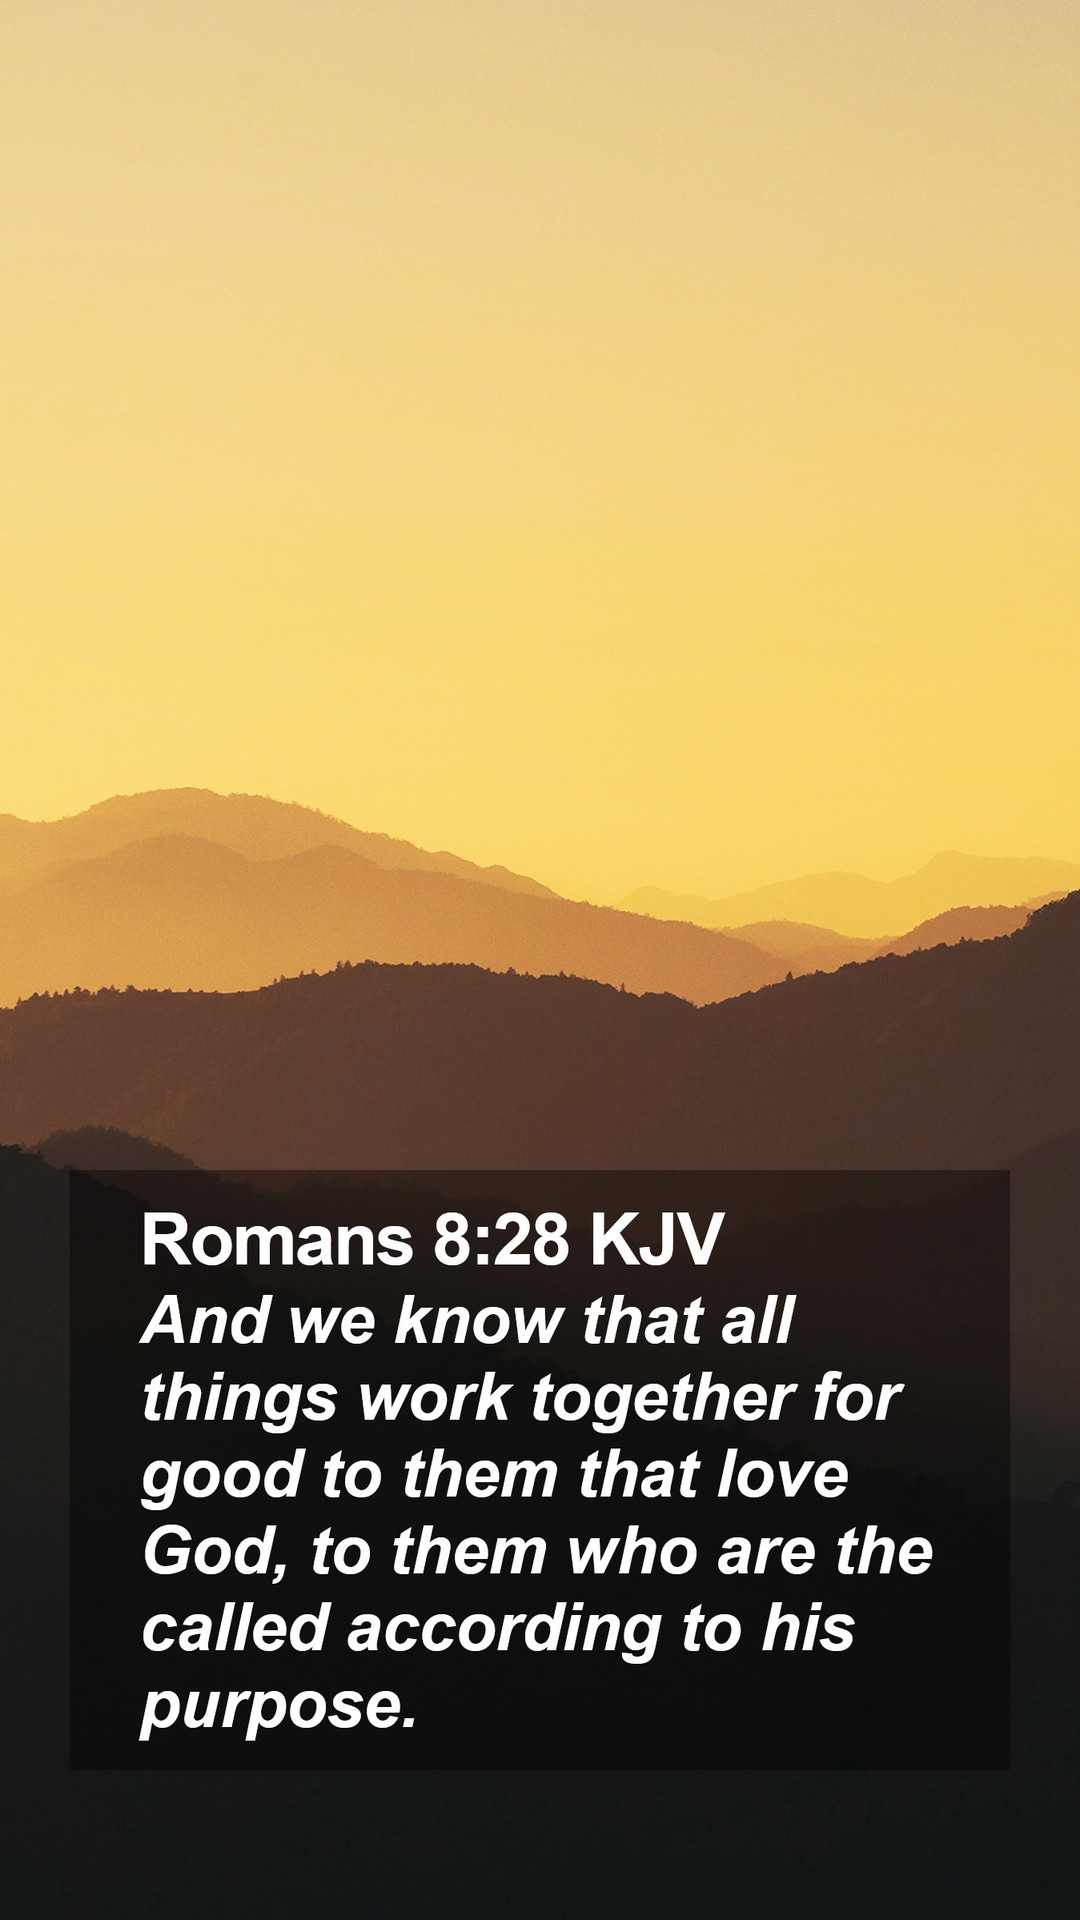 Romans 8:28 KJV Mobile Phone Wallpaper we know that all things work together for